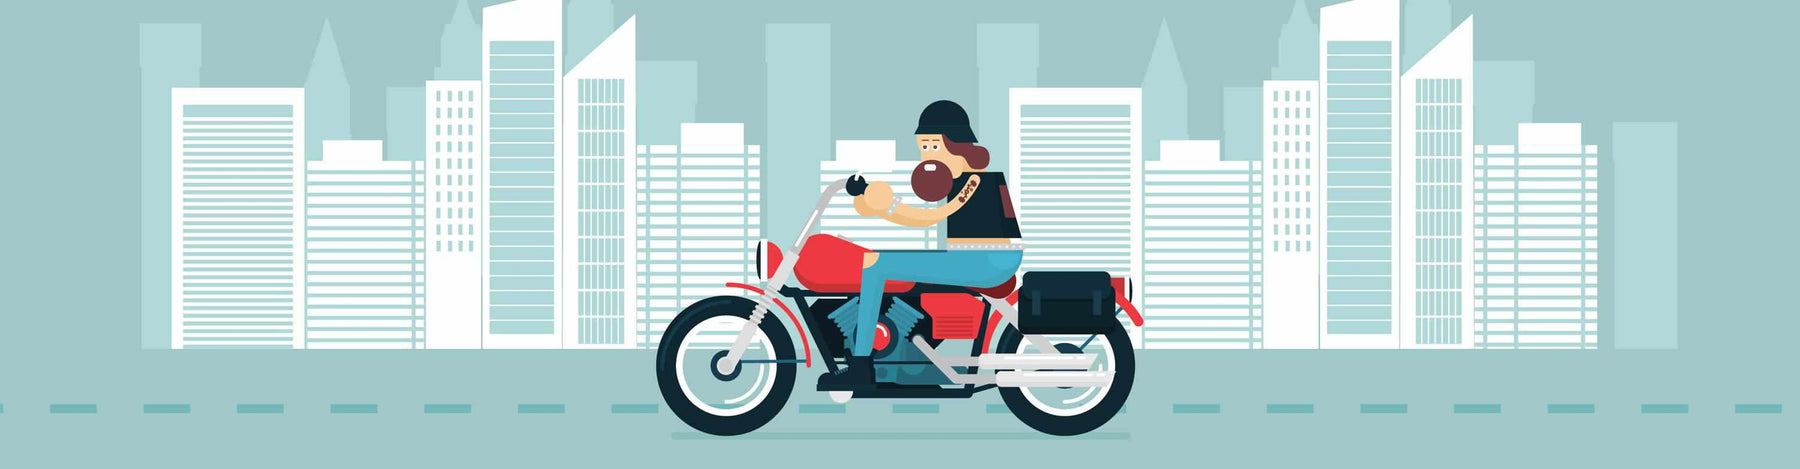 7 Motorcycle Safety Tips All Riders Need To Swear By - - BlackboxMyCar